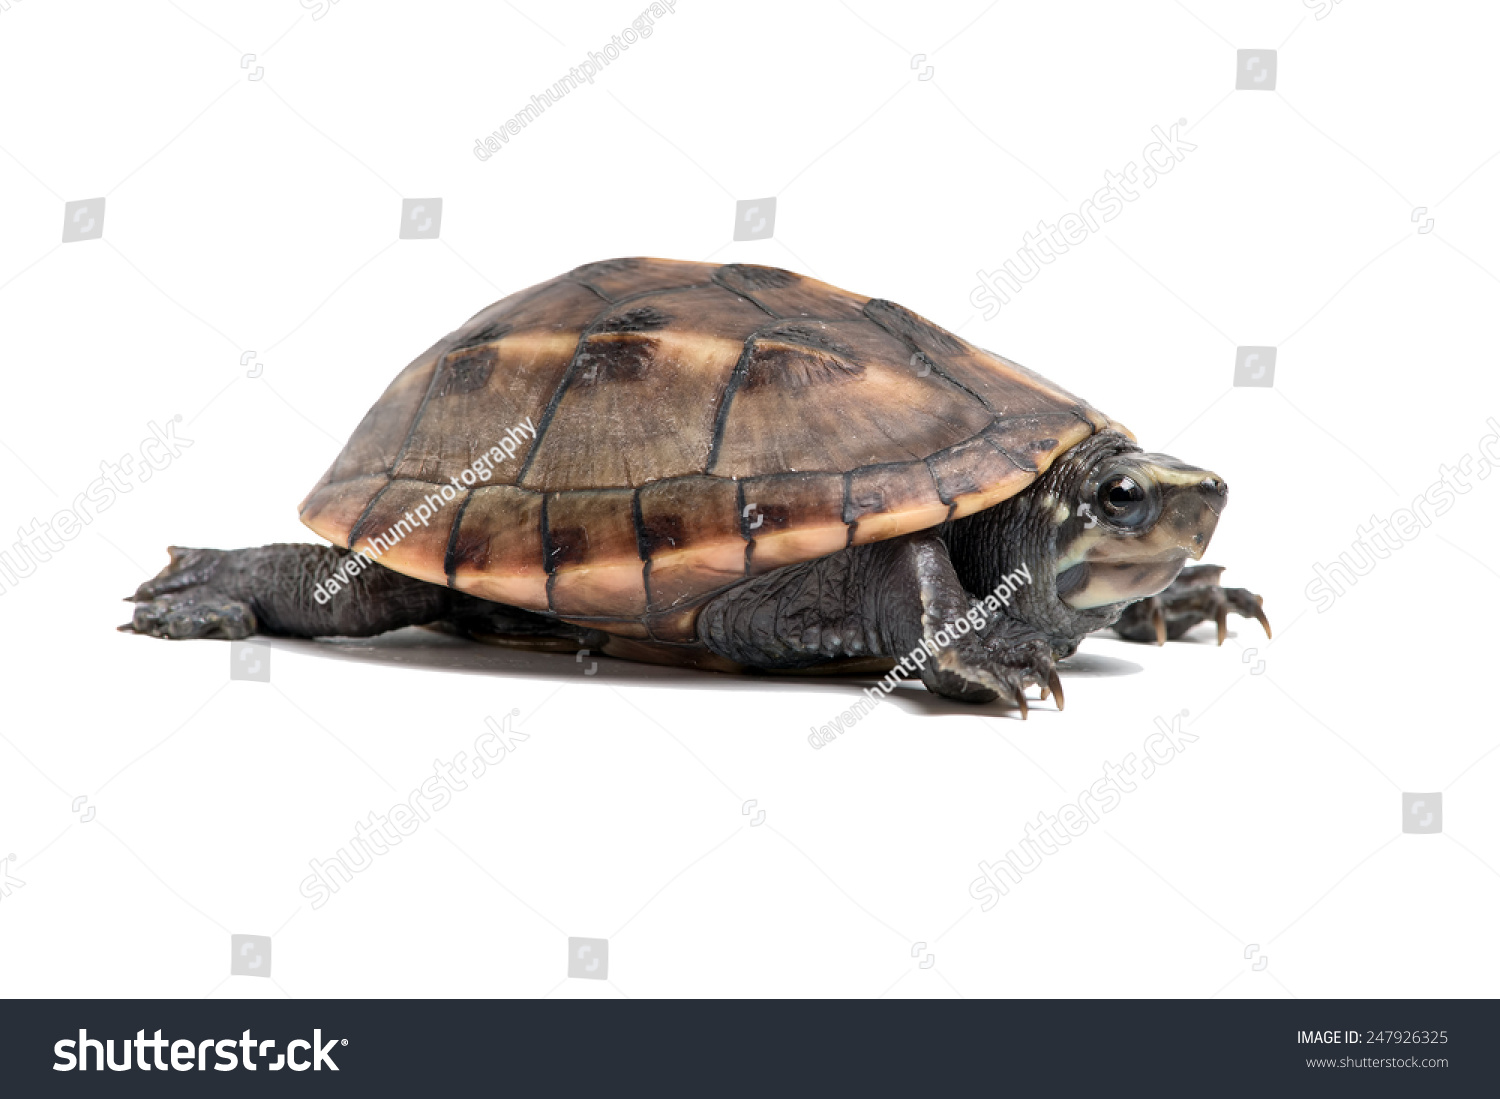 Striped Mud Turtle on a white background/Mud Turtle/Striped Mud Turtle (Kinosternon Baurii) #247926325